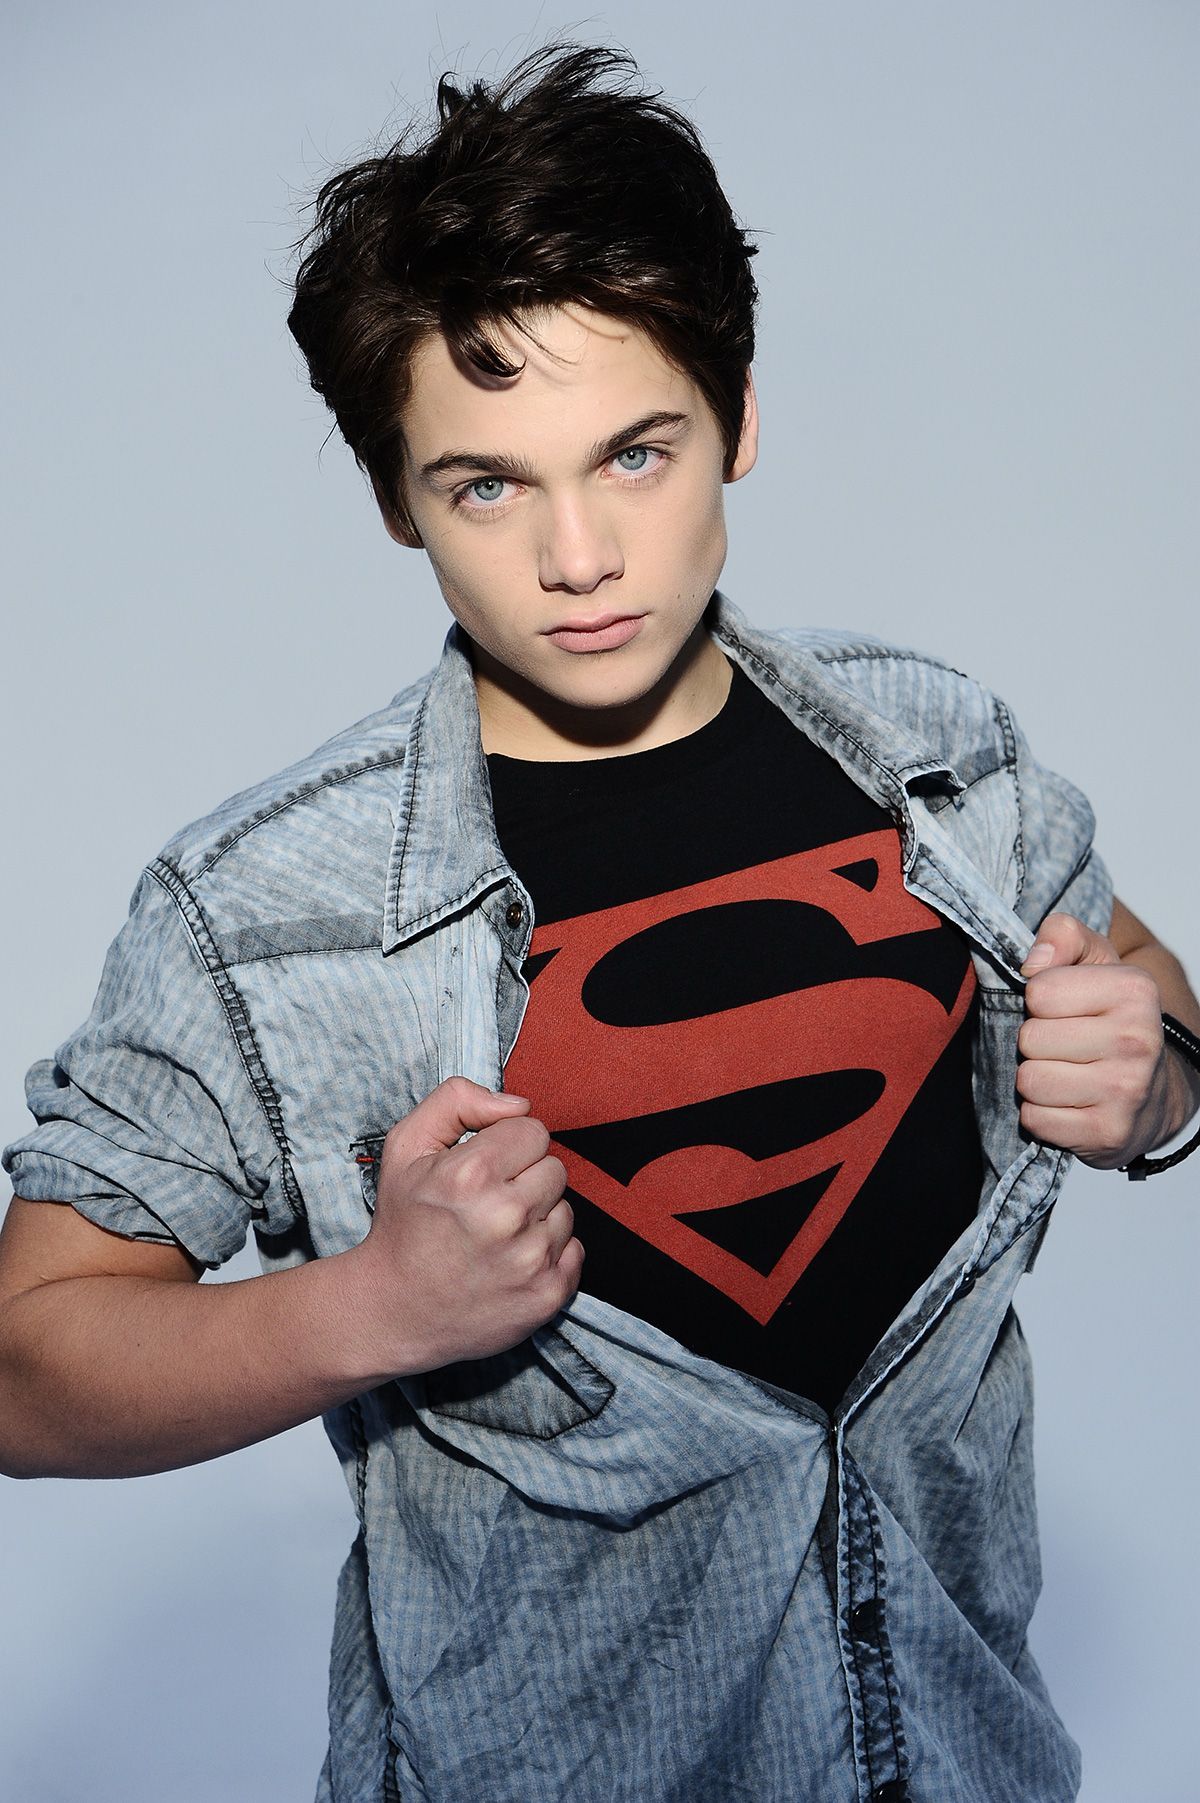 DYLAN SPRAYBERRY YOUNG SUPERMAN choice to play Superboy.-El